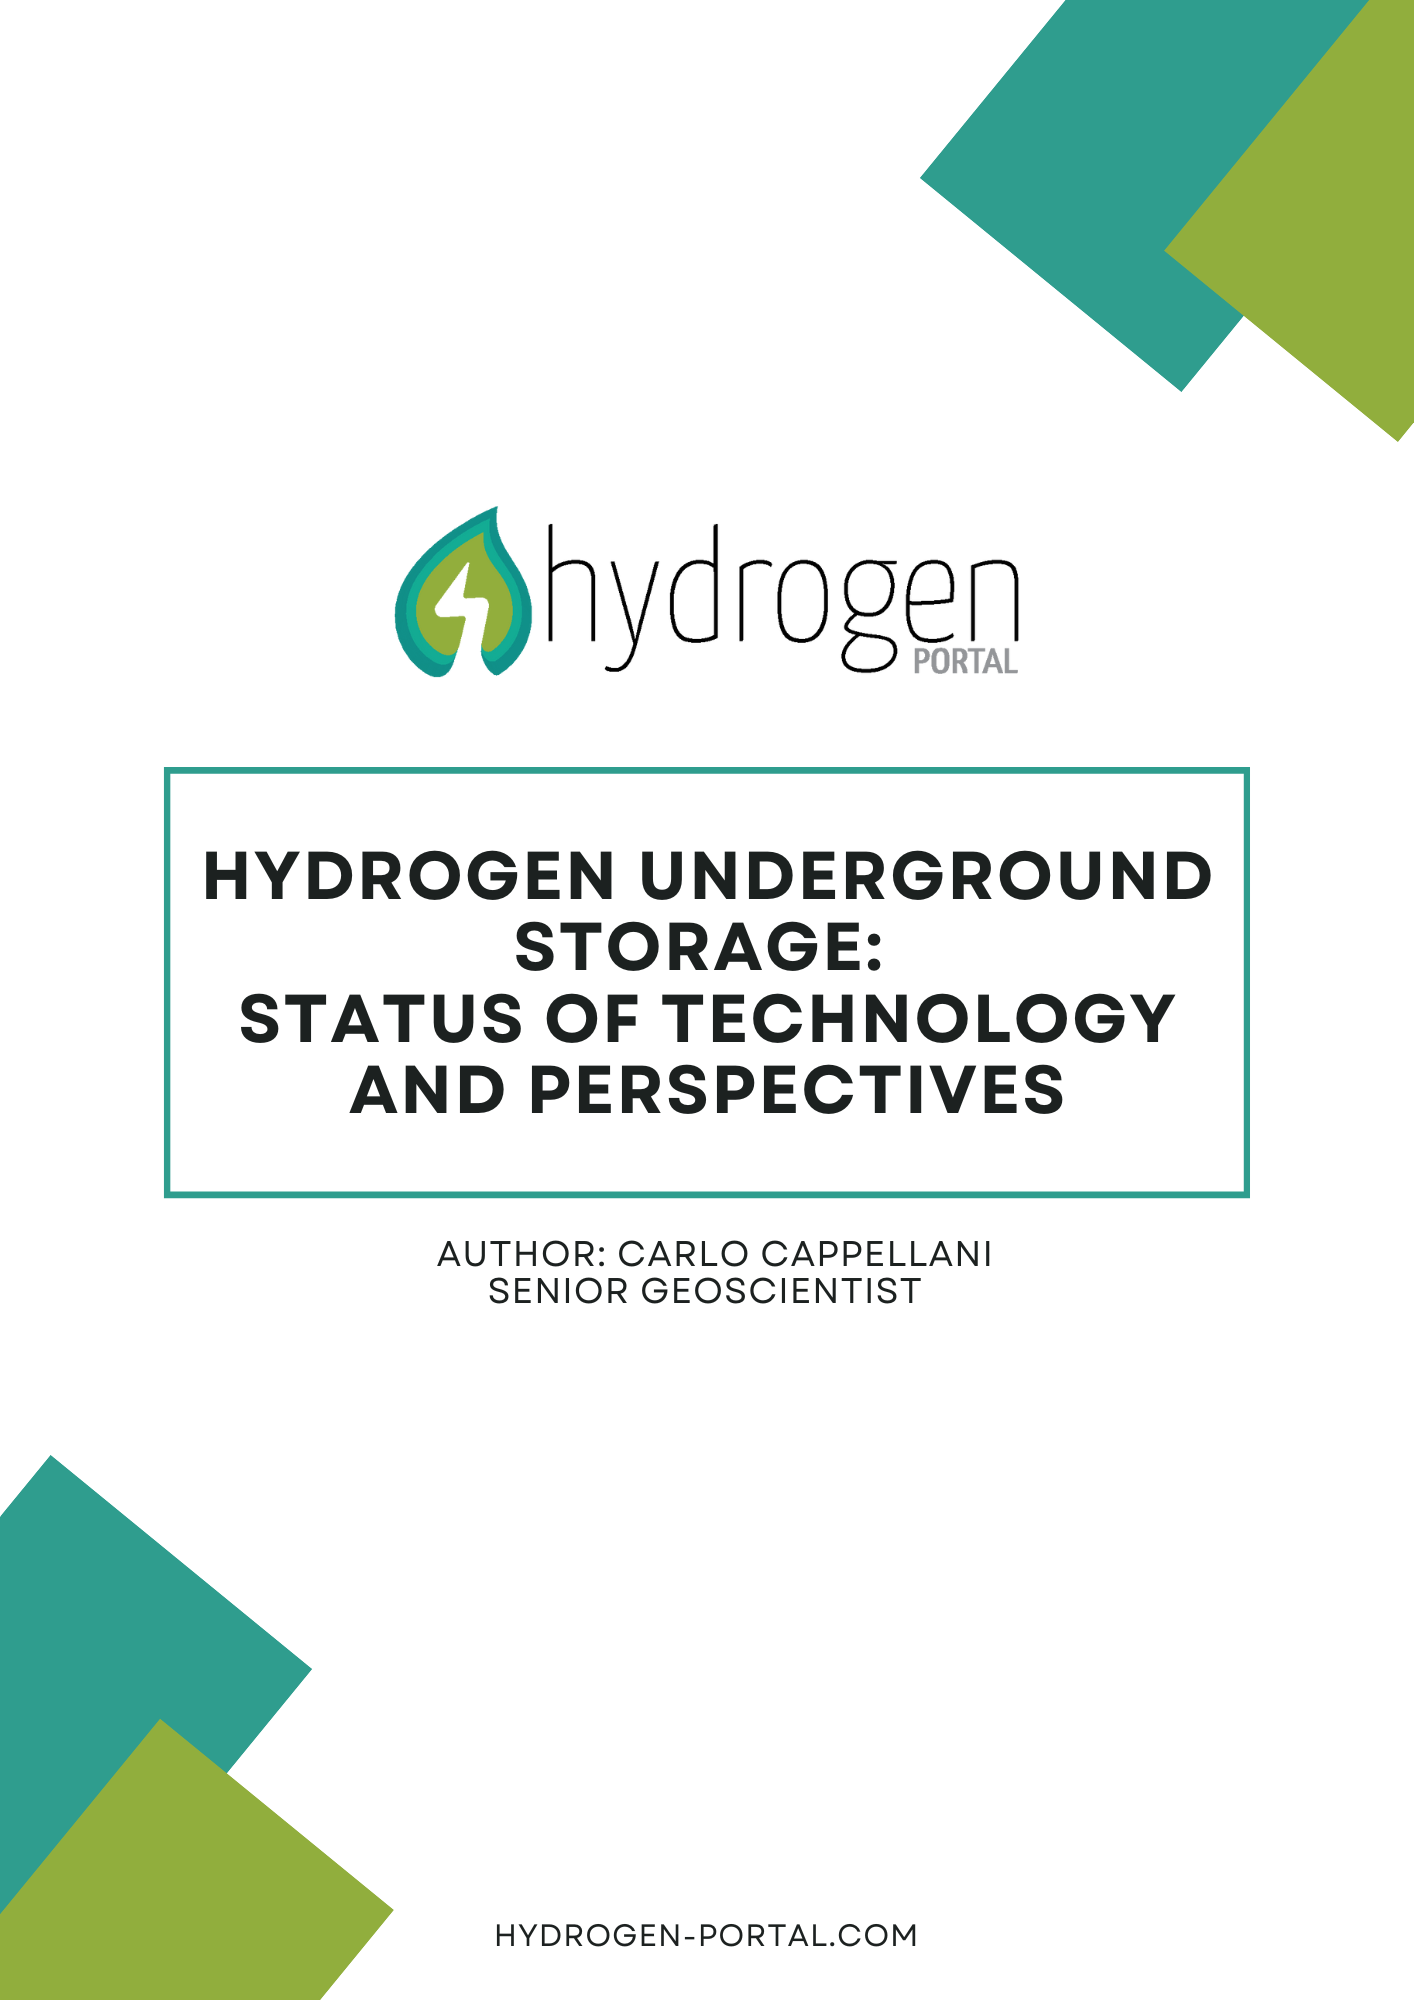 Ultra-high density hydrogen storage holds twice as much as liquid H2